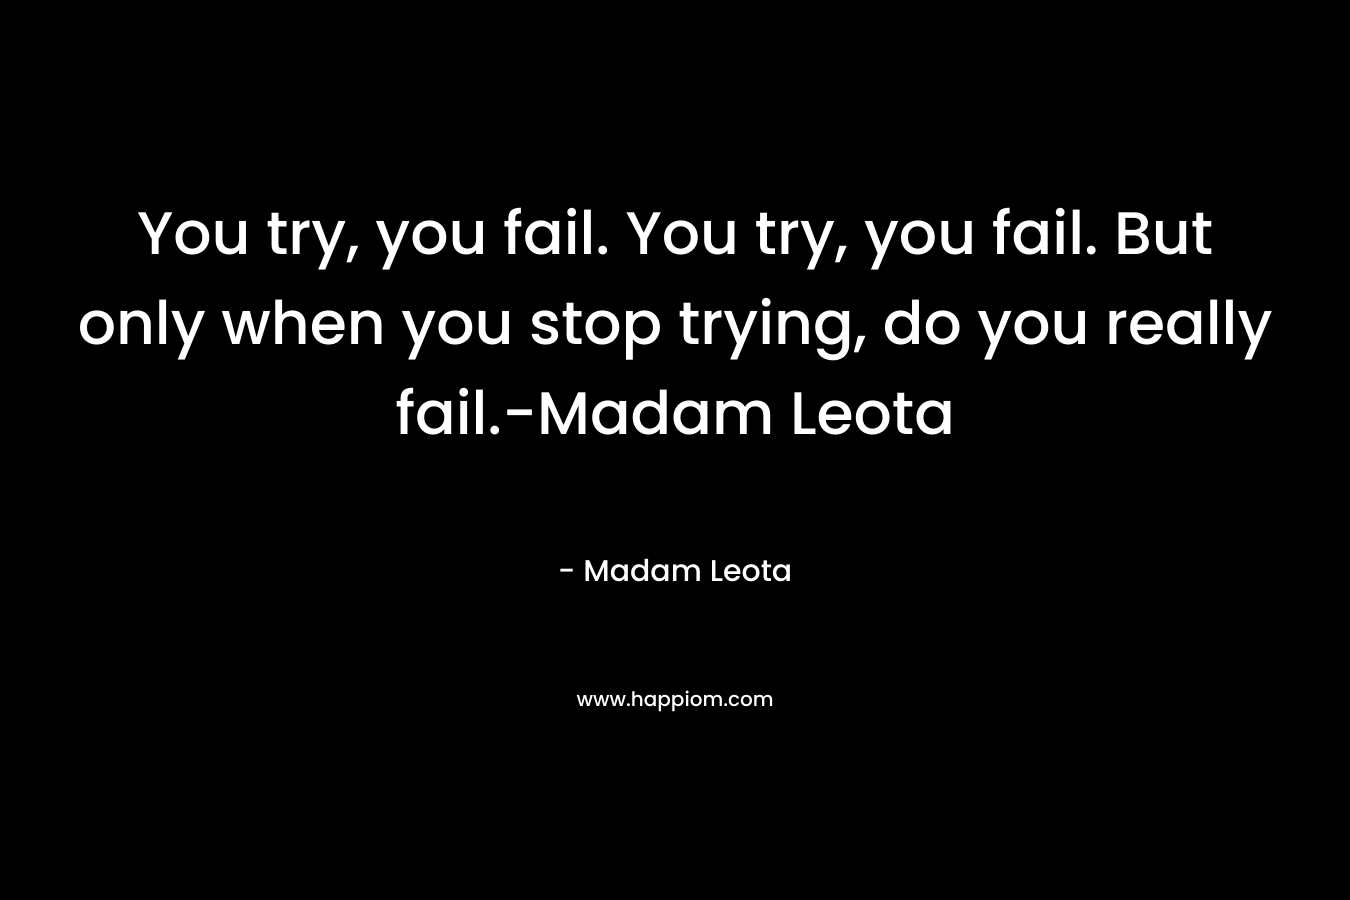 You try, you fail. You try, you fail. But only when you stop trying, do you really fail.-Madam Leota